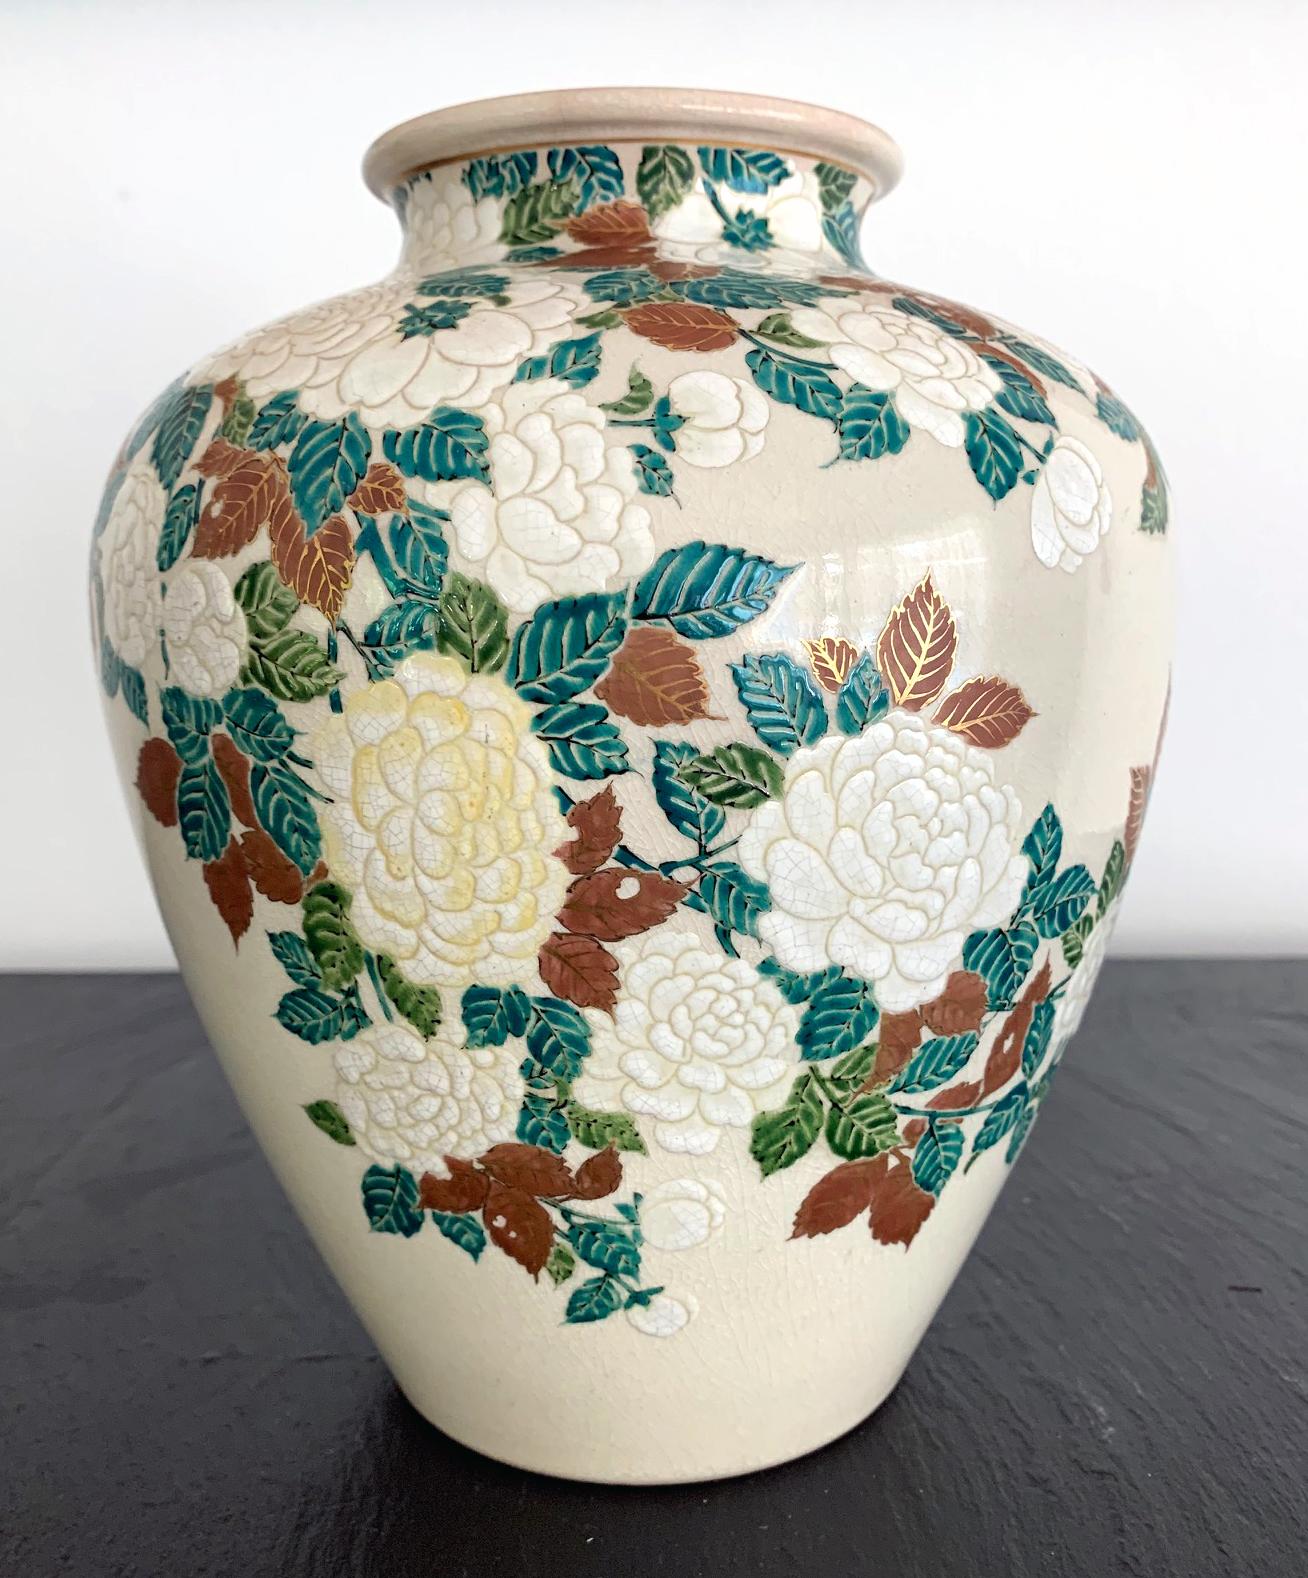 This stoneware vase of a jar form was finely decorated with low relief carving and delicate colored glazes depicting bundles of peony flowers. It was made by Ito Tozan I (1846-1920) circa 1890-1900s in the late Meiji Period. The color pallet was